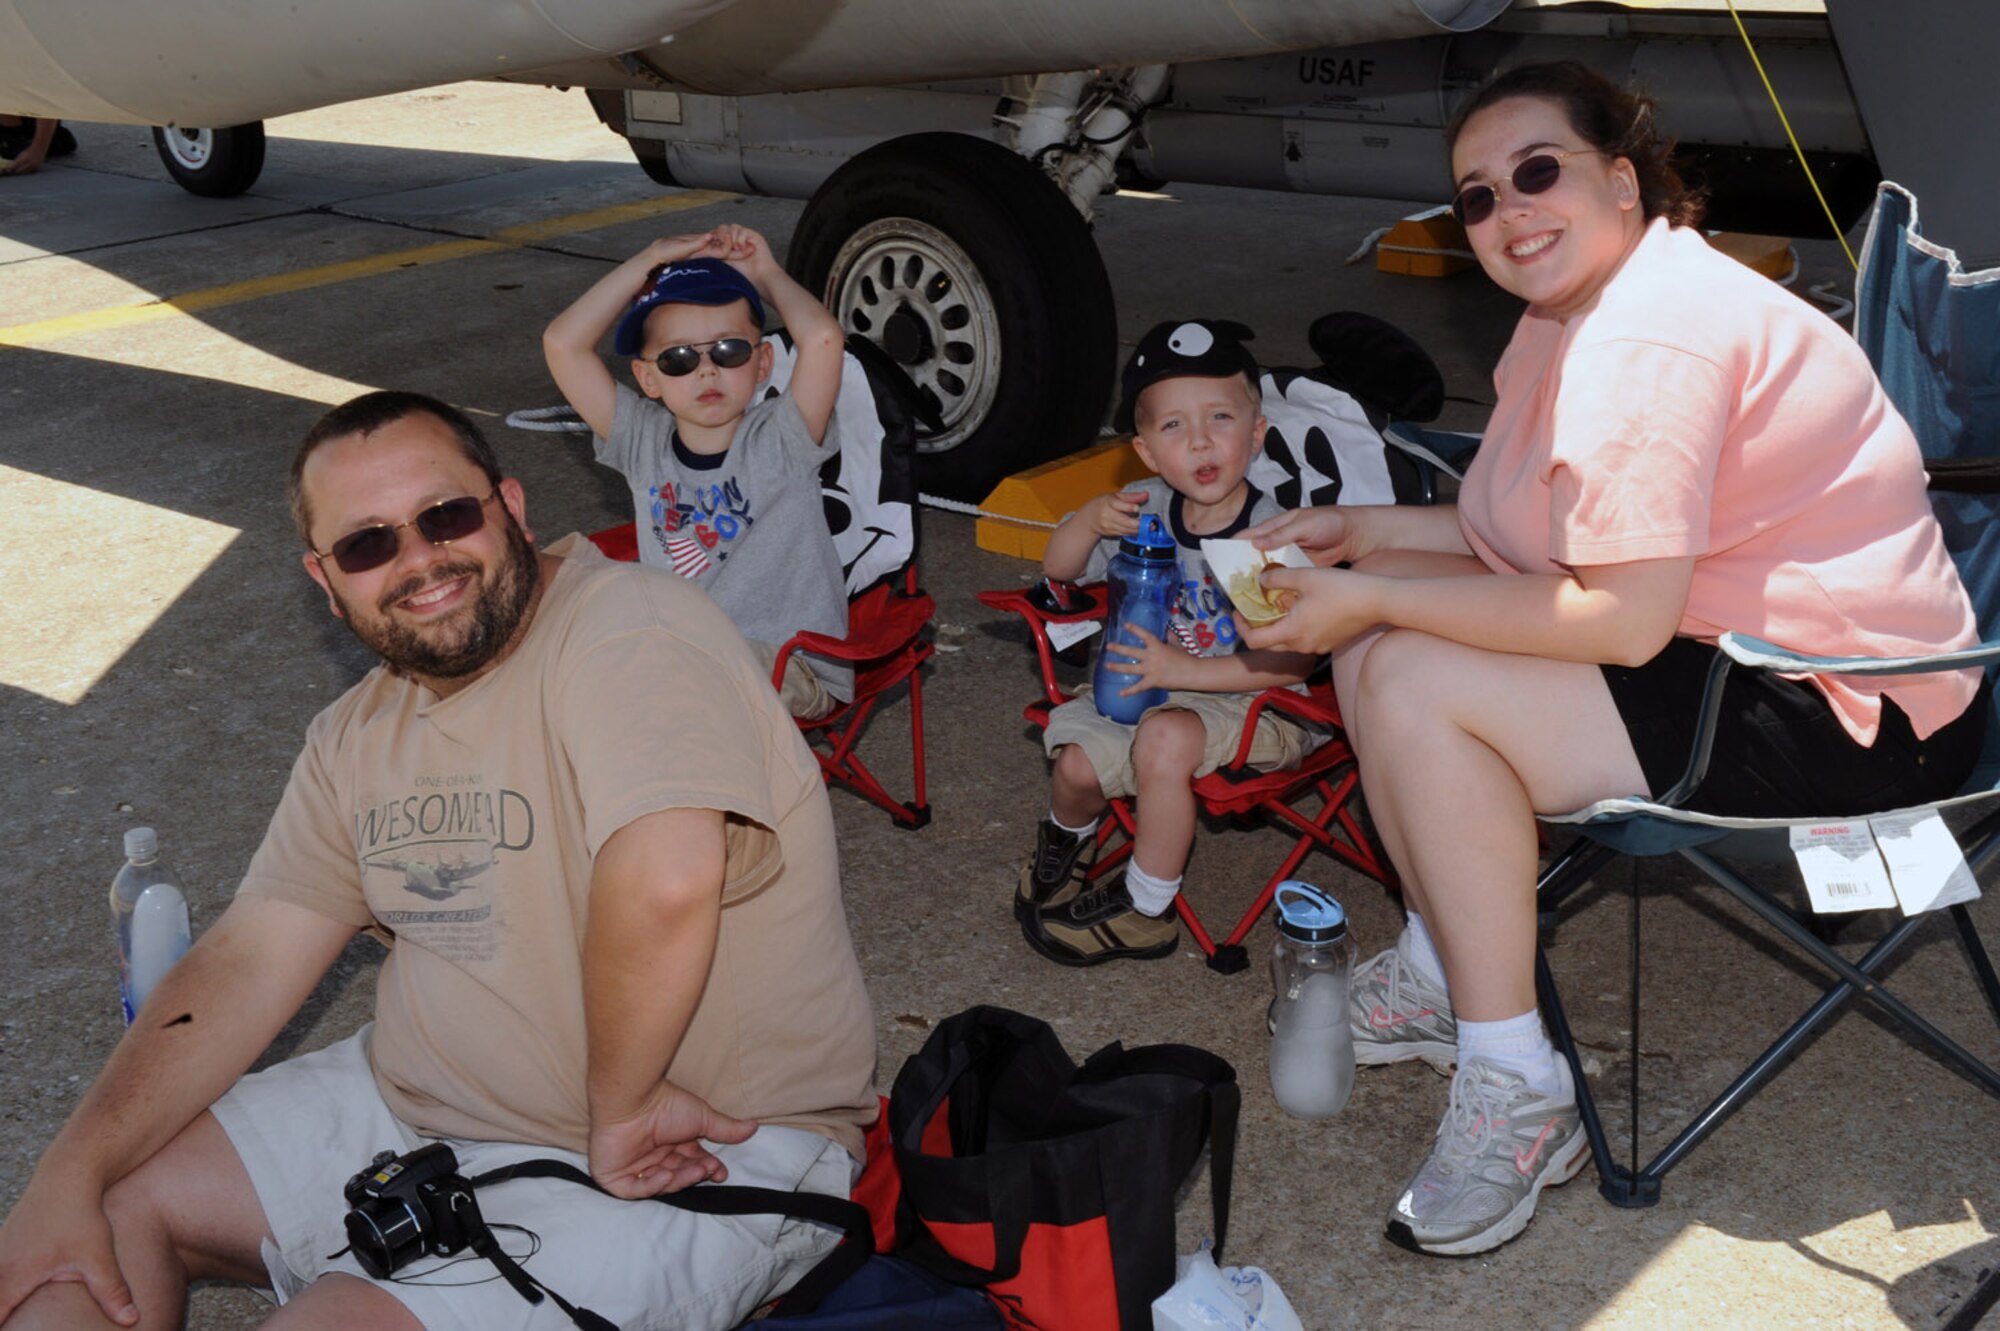 WARRENSBURG, Mo. - The Harrison family of Knob Noster, Mo., rest under the wing of an F-15 during the Wings Over Whiteman Air Show and Open House June 6.  Other aircraft on display include; A-10, civilian planes from the University of Central Missouri and Kansas State University, F-22, and an Apache helicopter. (U.S Air Force photo/Senior Airman Jason Huddleston)